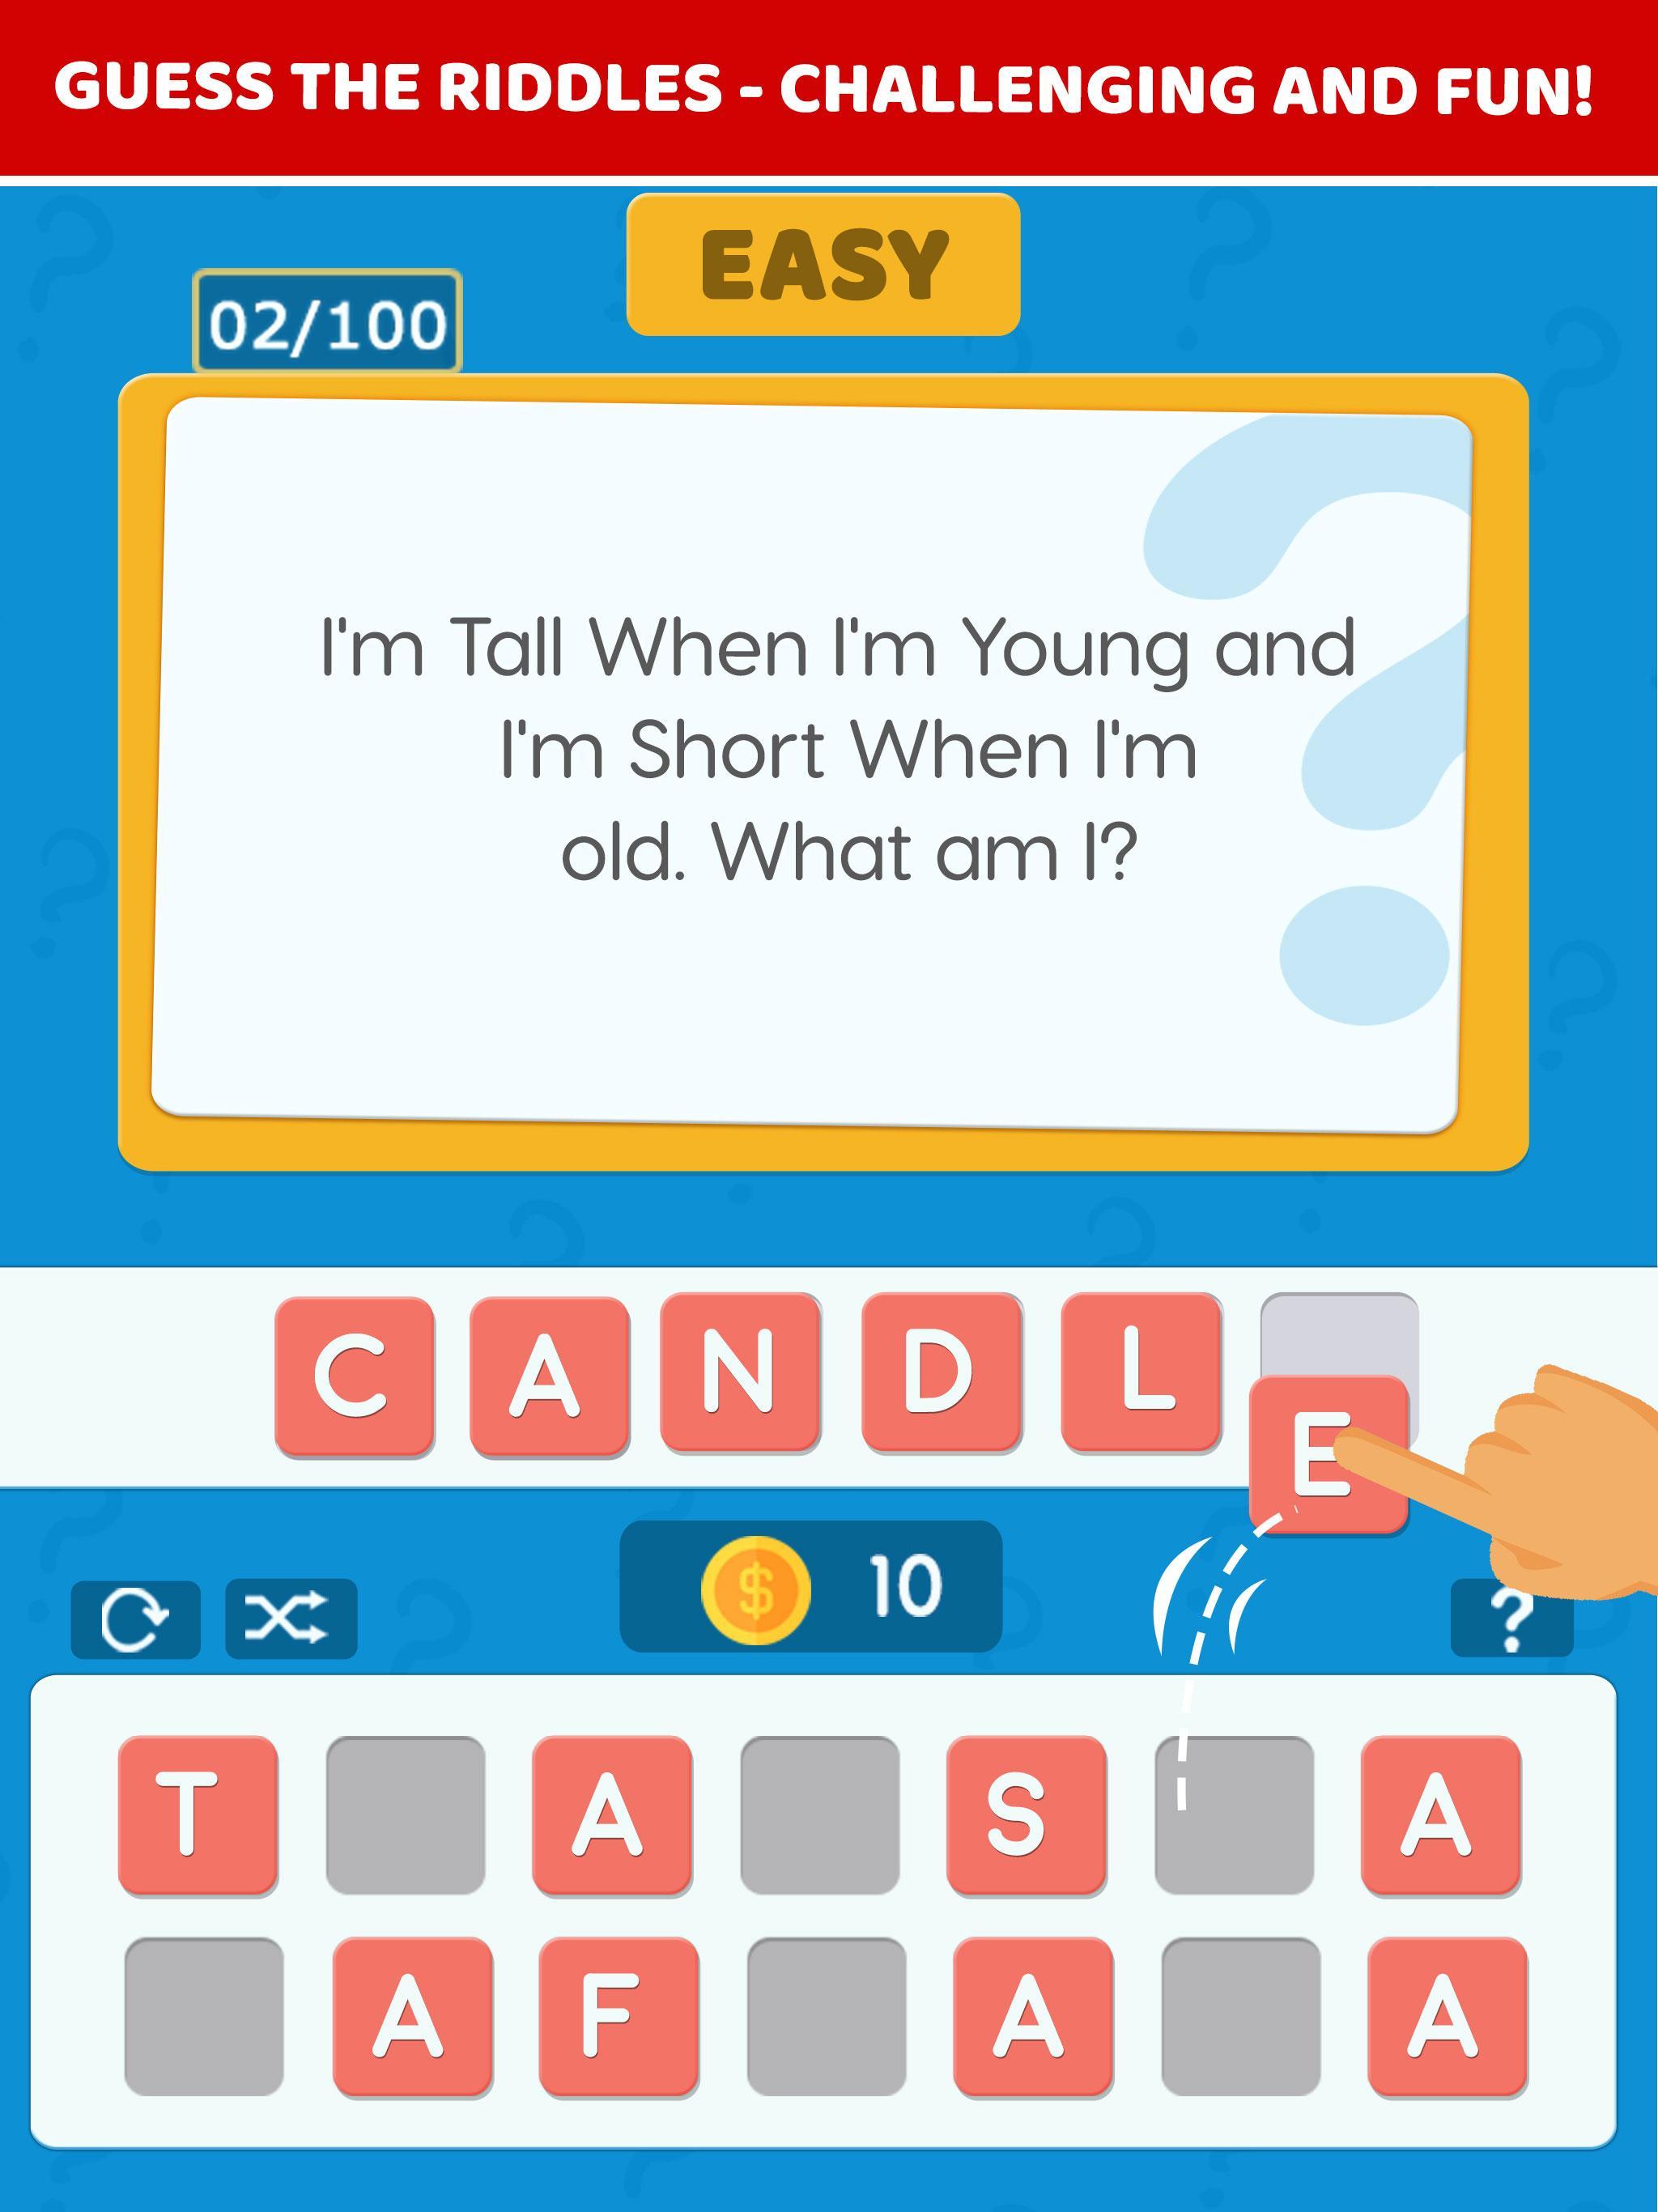 What Am I - Brainy & Tricky Riddles with Answers for Android - APK Download